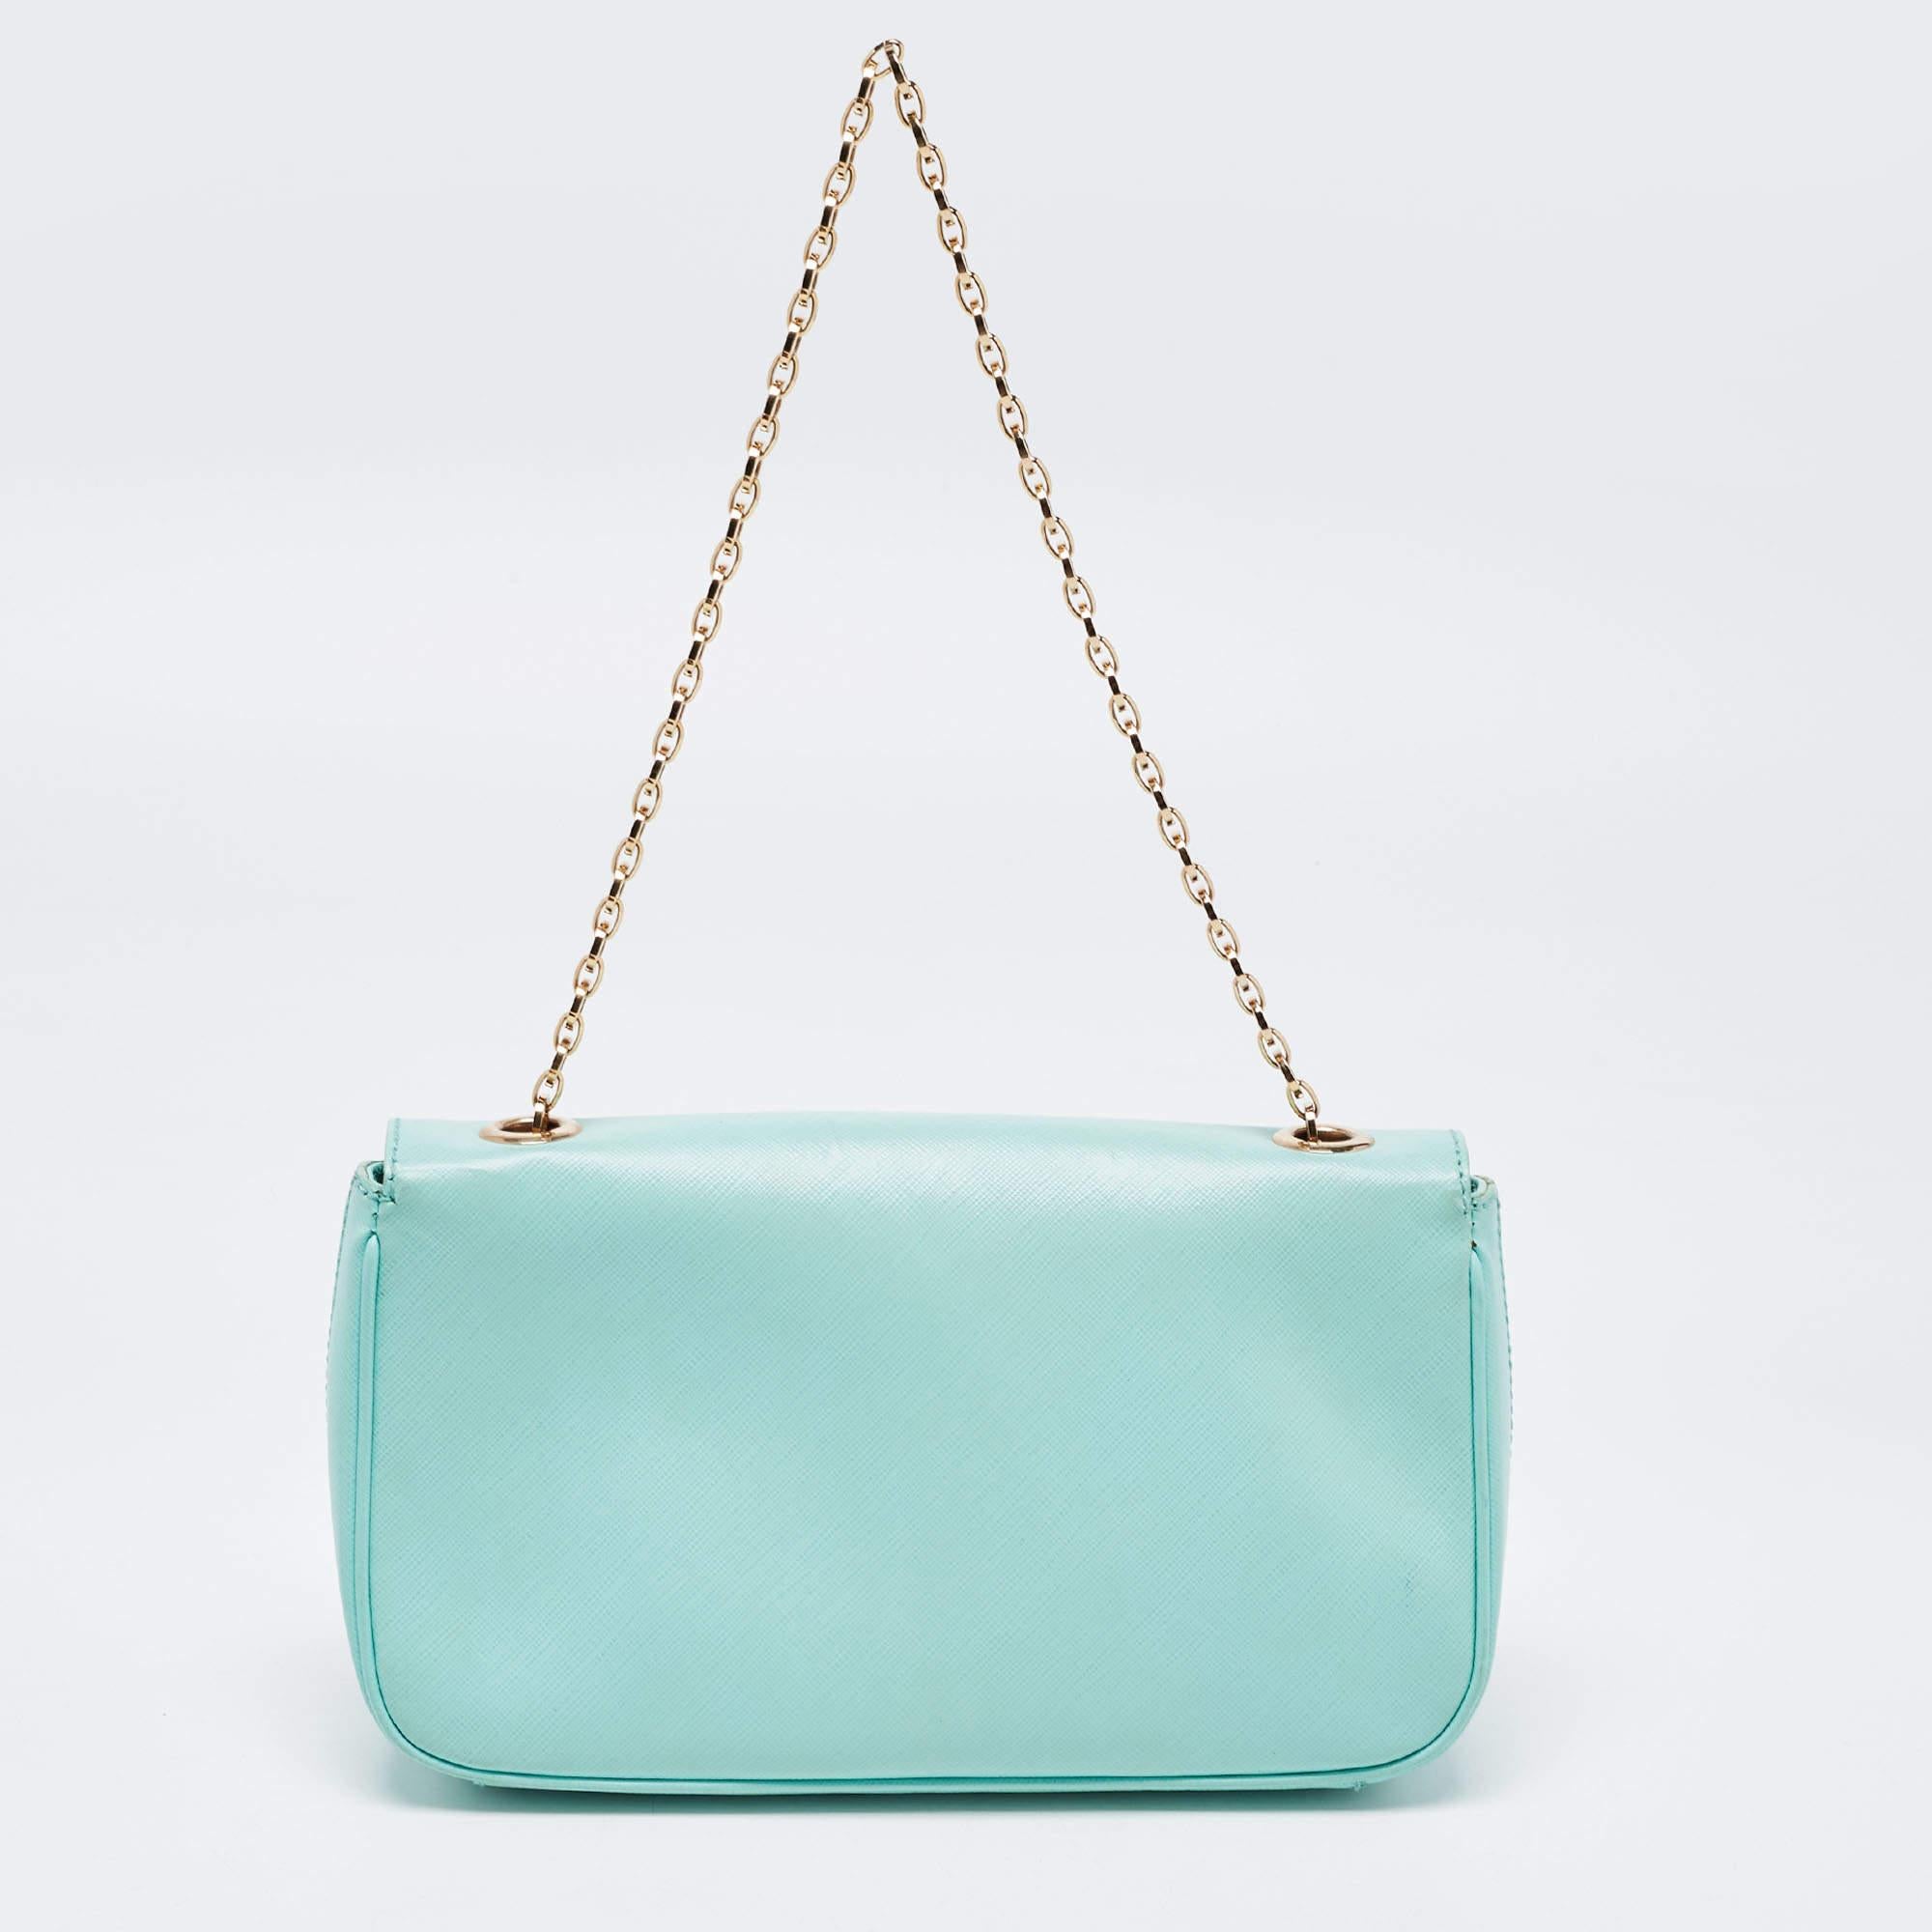 Cool, Trendy, Aesthetic and Adorable. This Mint Green Flap bag from the house of Salvatore Ferragamo cues in spark to your attitude. It rightly adds flame to your looks and panache. The elegance of this Gancini Leather product is exquisite and peps